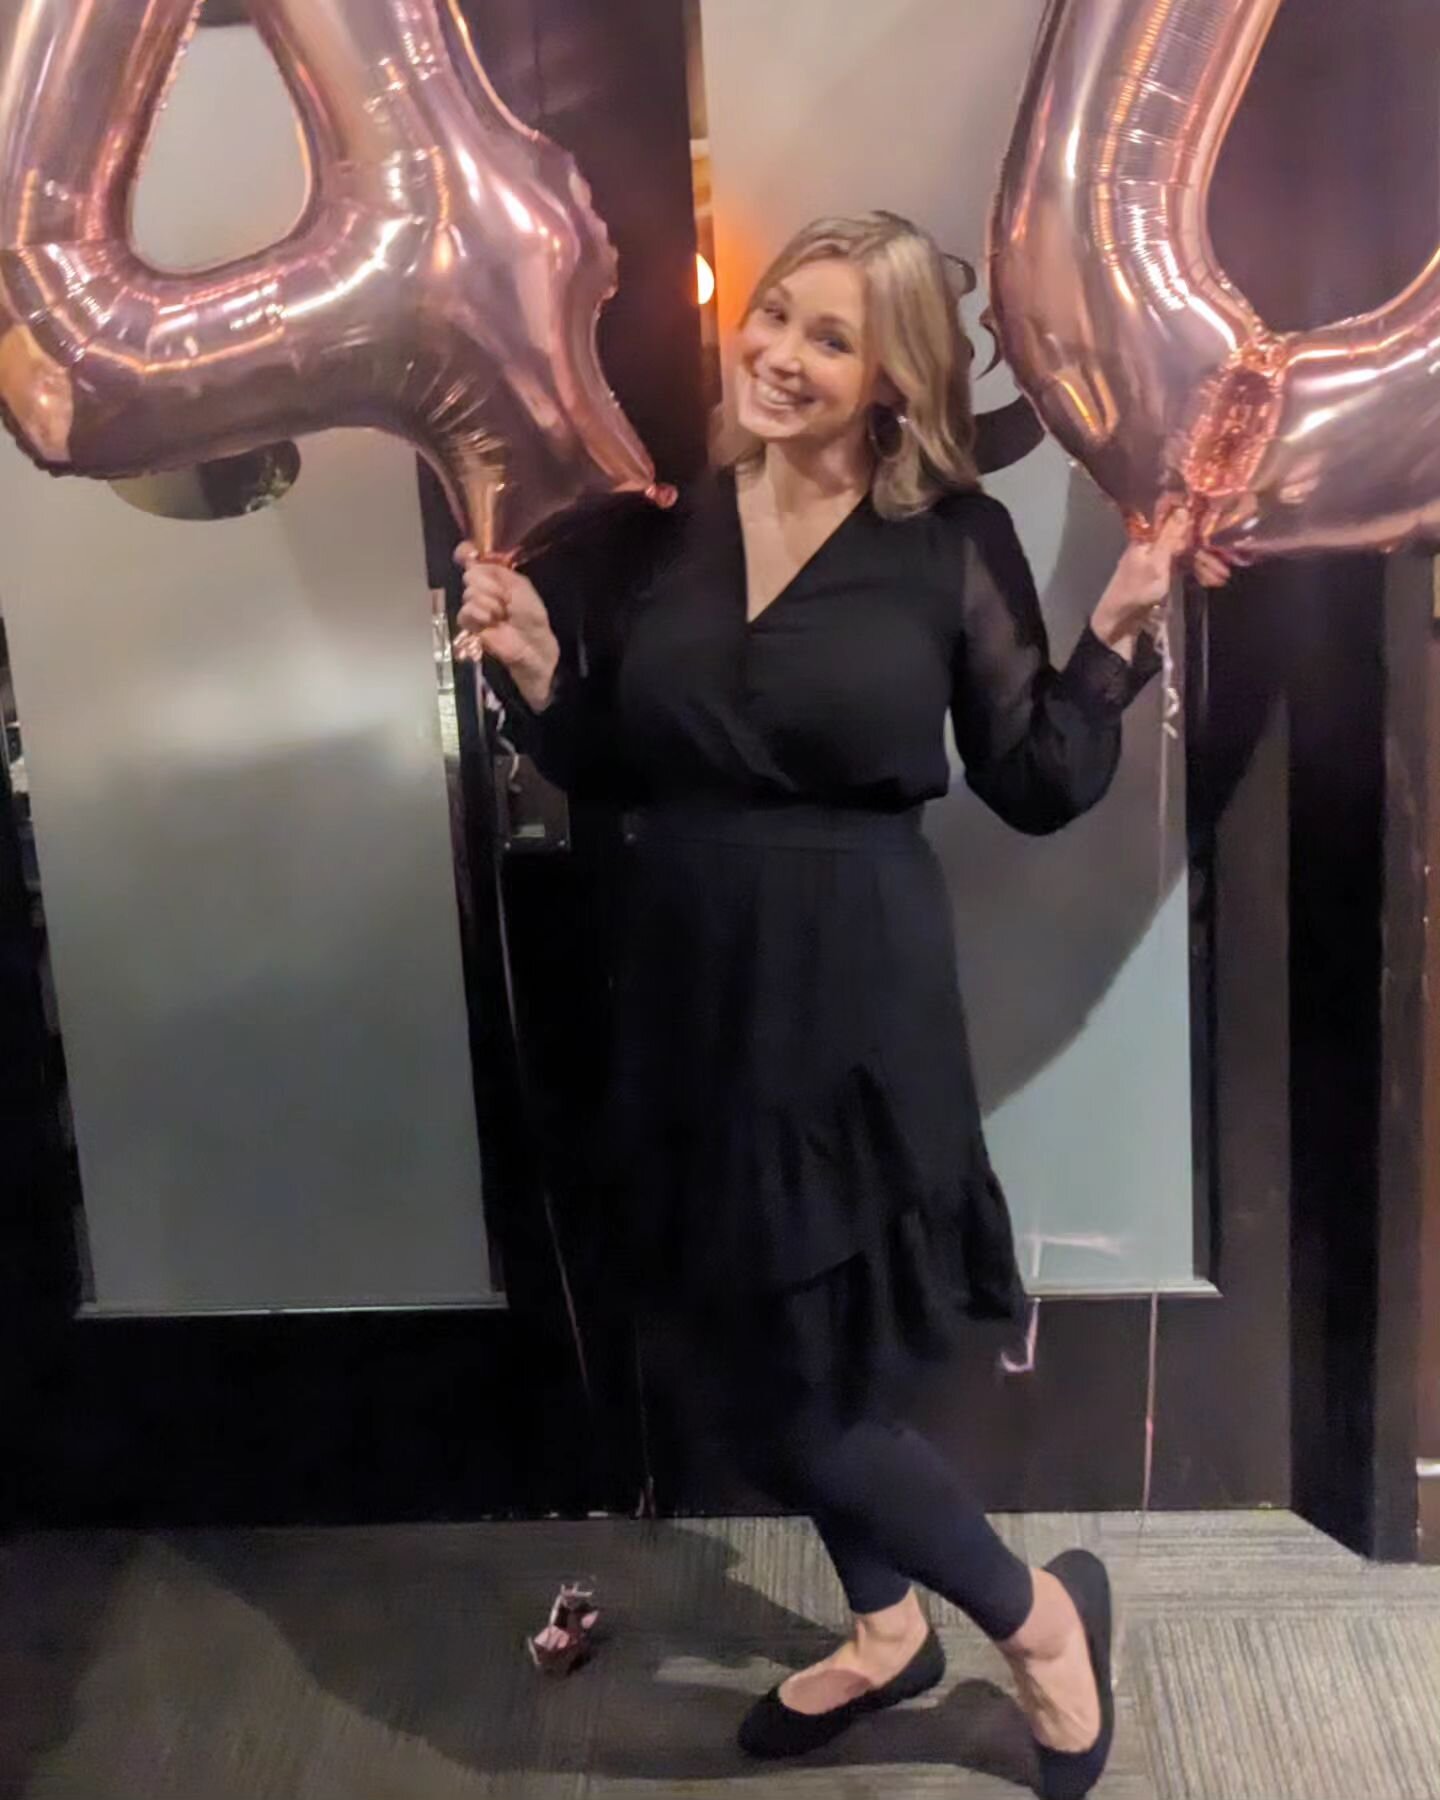 Born to be...40! 💖

This post is tempered by the tragic loss of someone connected to our church community this weekend...

And so, I celebrate this milestone's beauty, painfully aware of life's fragility.

My soul was touched &amp; blessed at a spec